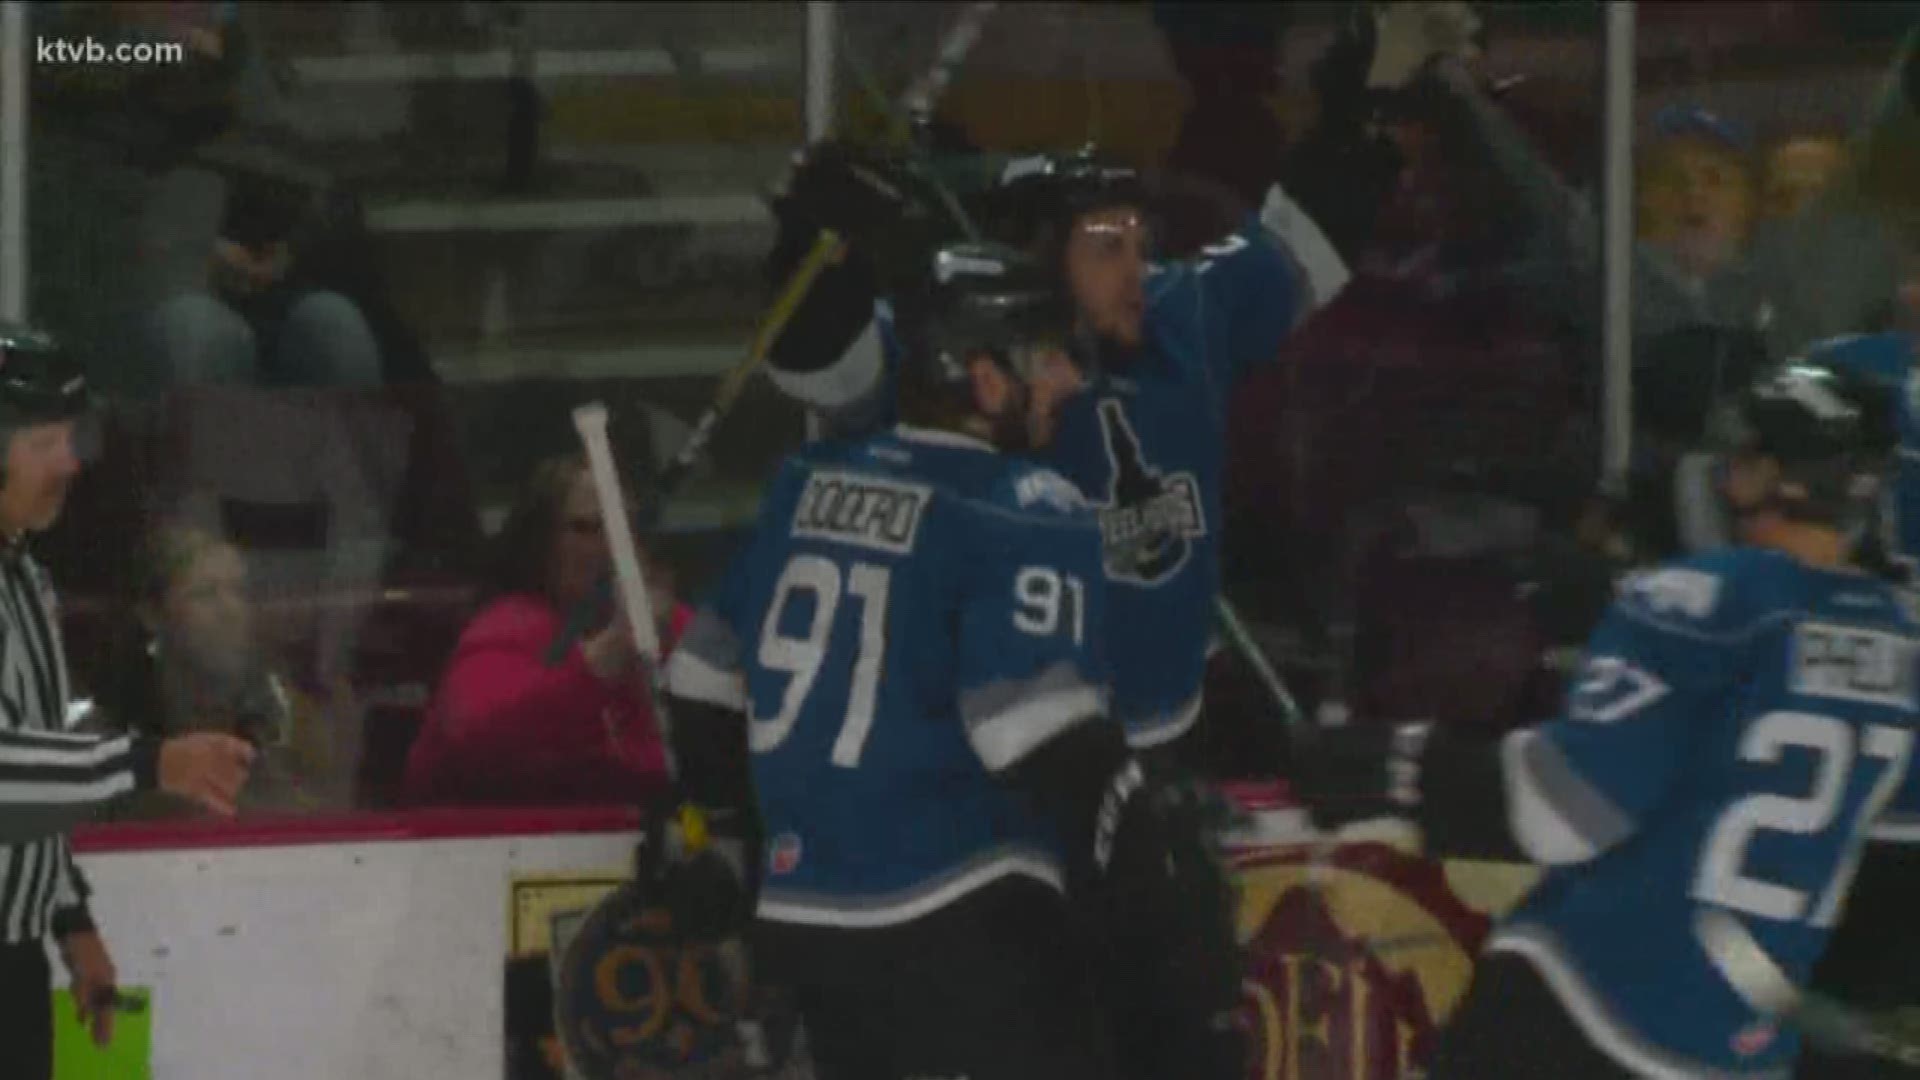 After losing game one, the Idaho Steelheads bounce back with a win over the Utah Grizzlies in their quest for  a Kelly Cup title.